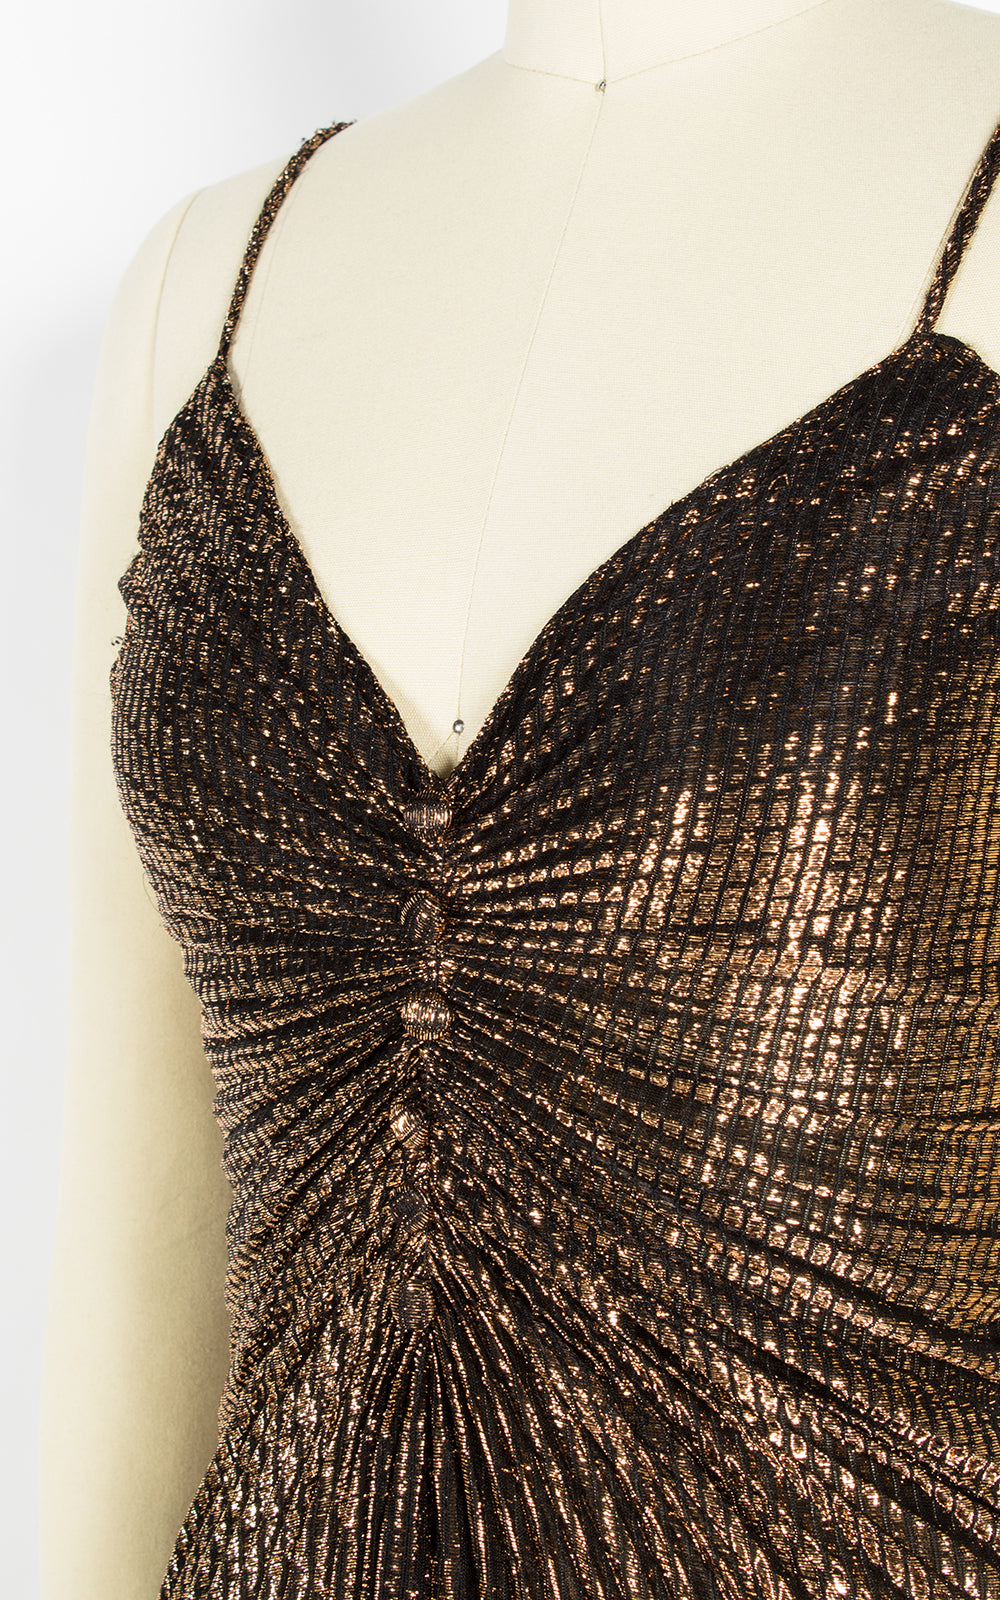 1950s Style Travilla Inspired Metallic Gold Pleated Party Dress